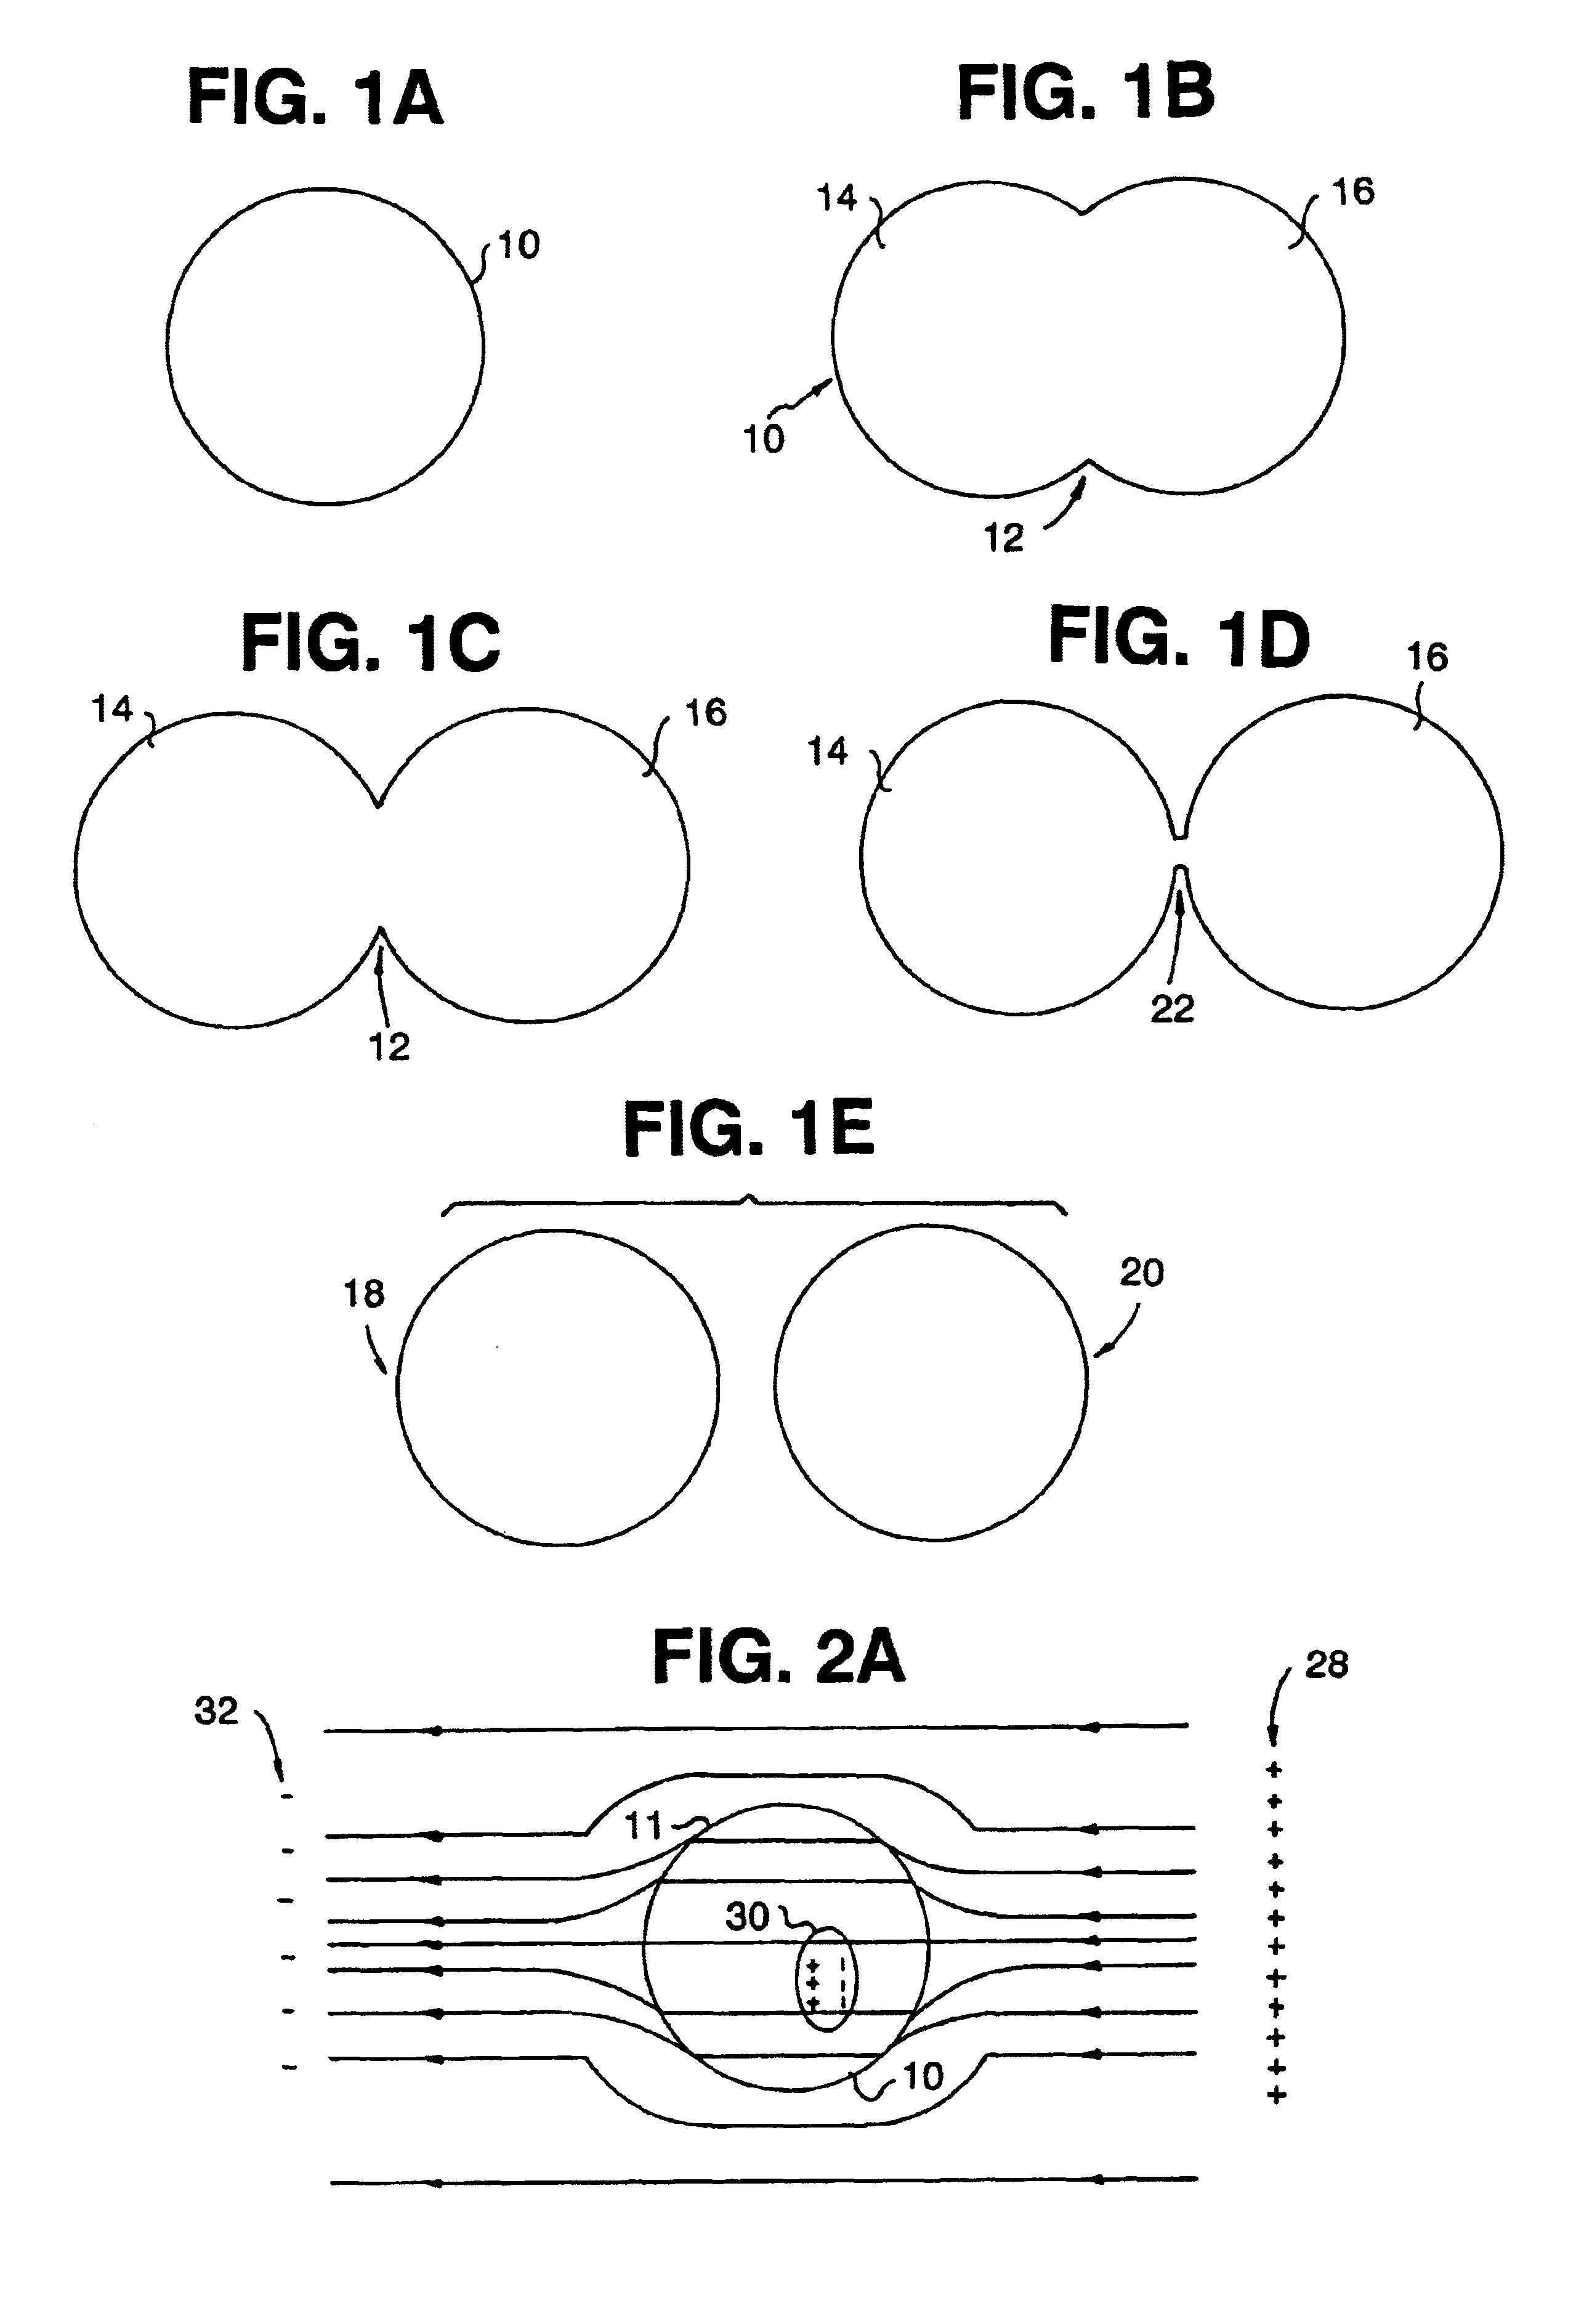 Apparatus for treating a tumor or the like and articles incorporating the apparatus for treatment of the tumor